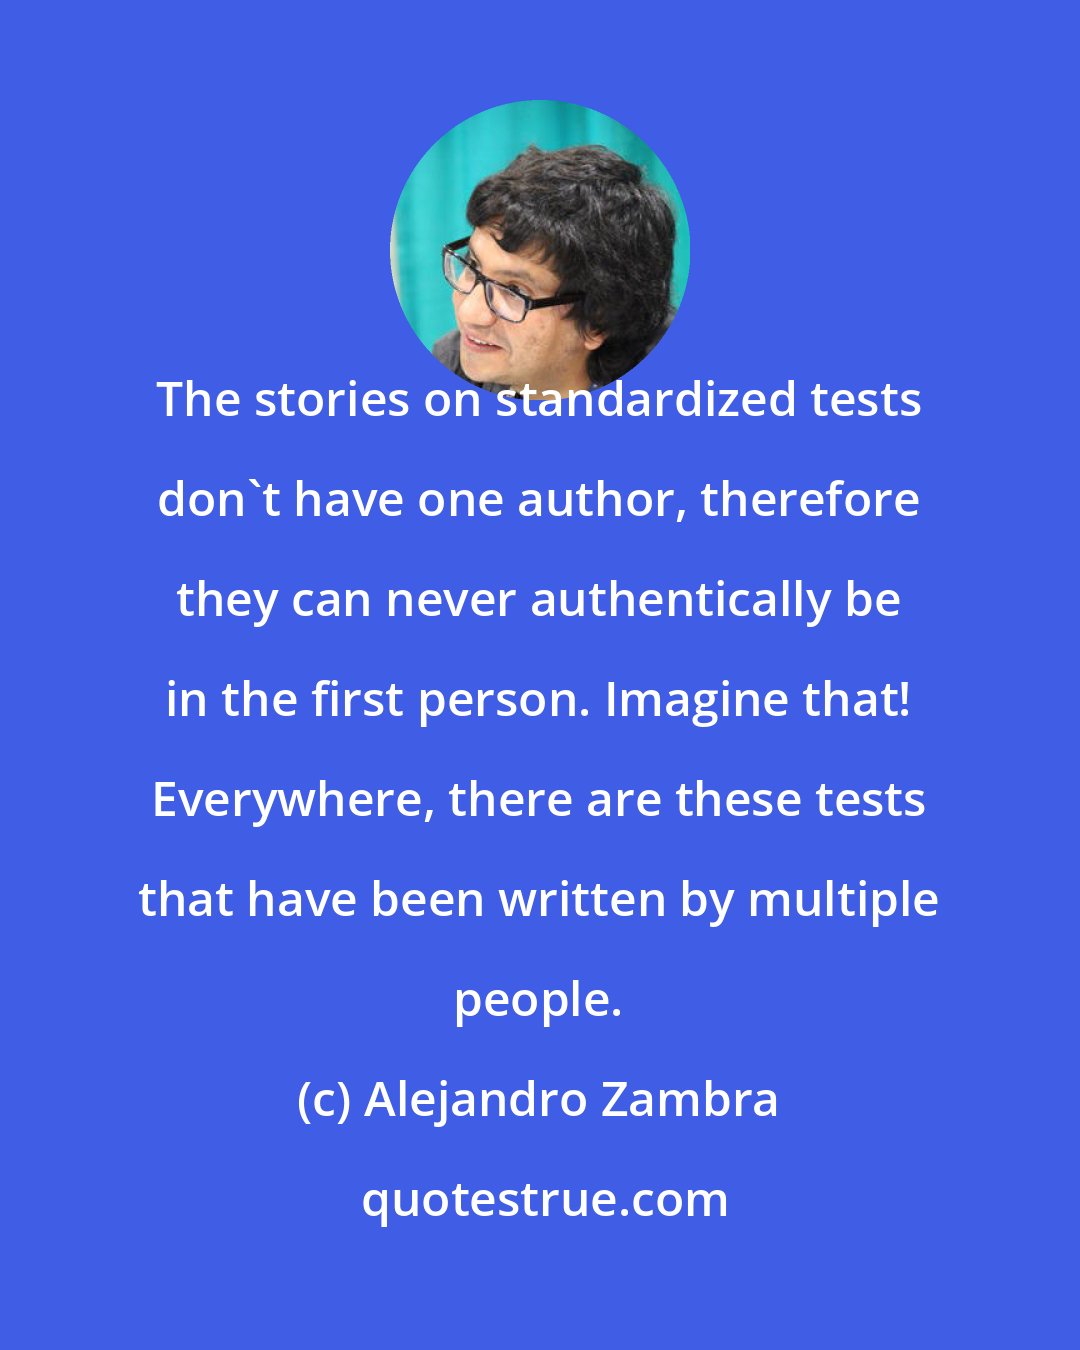 Alejandro Zambra: The stories on standardized tests don't have one author, therefore they can never authentically be in the first person. Imagine that! Everywhere, there are these tests that have been written by multiple people.